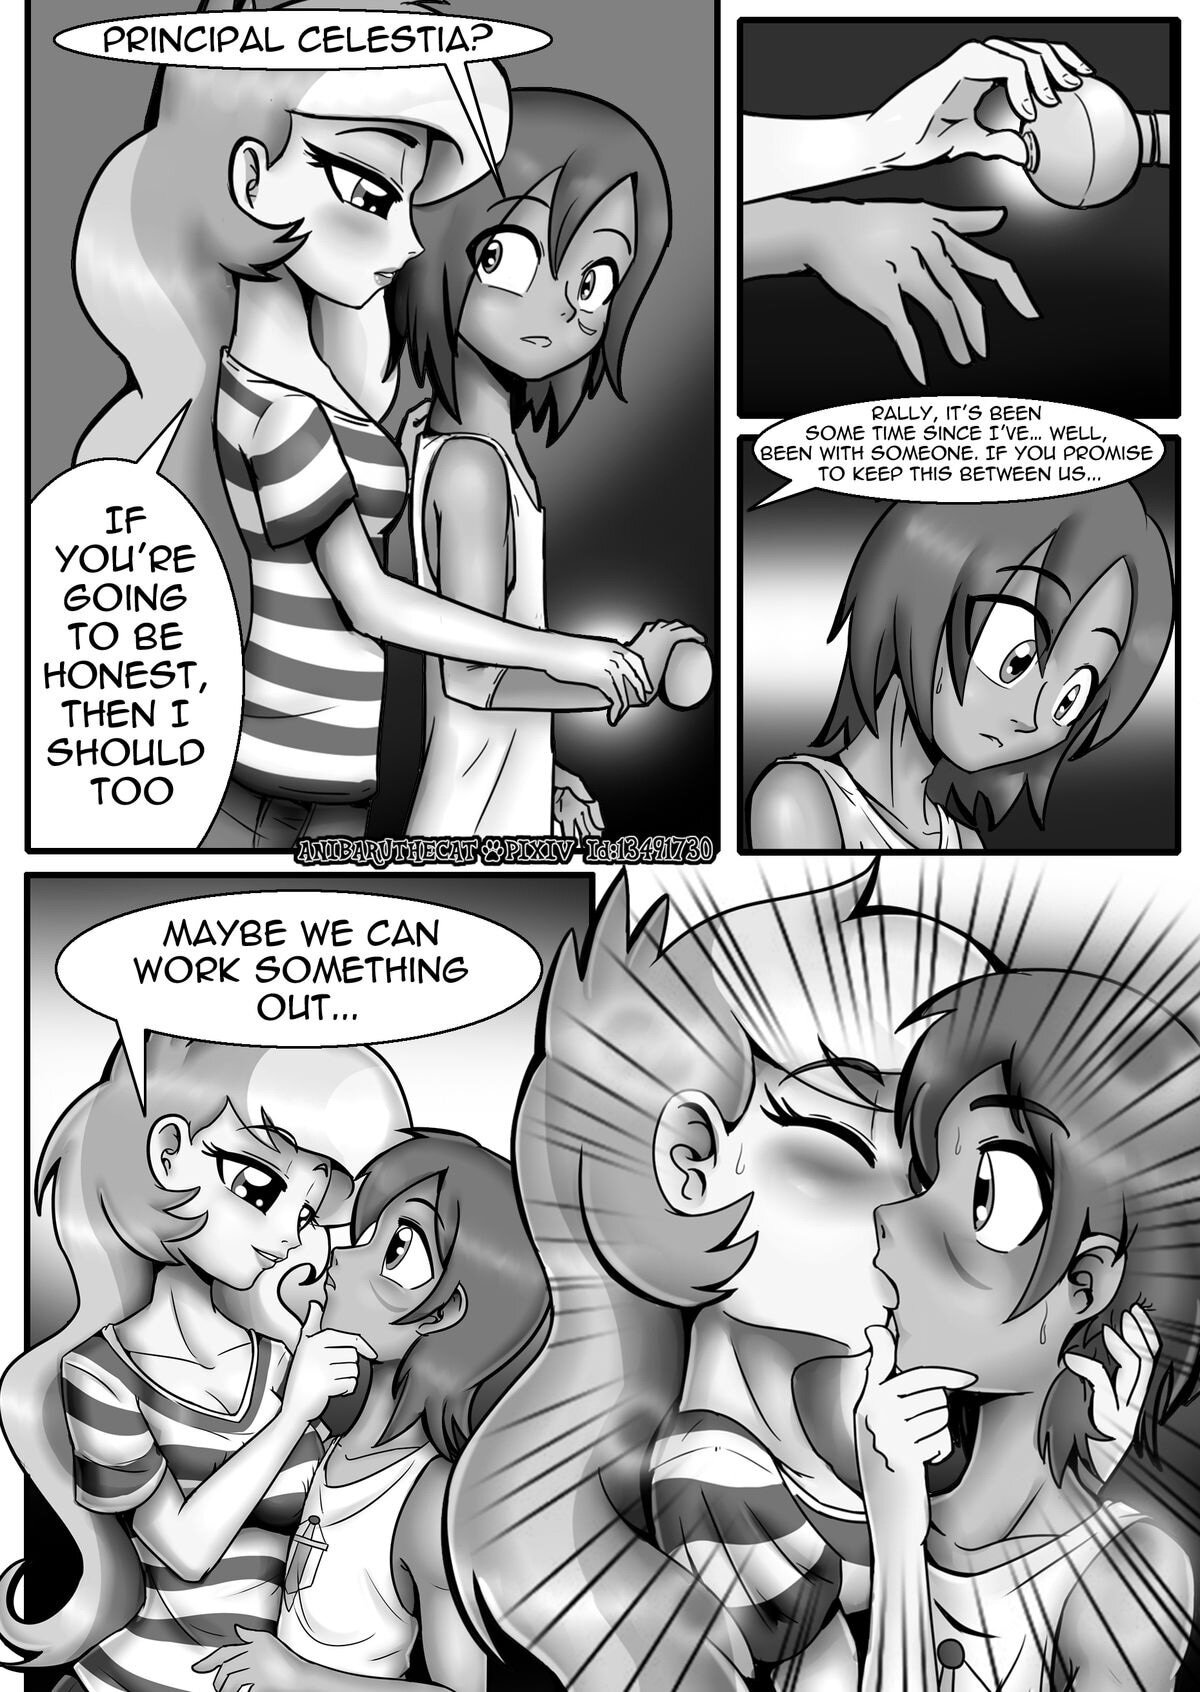 Boys will be Boys - Page 6